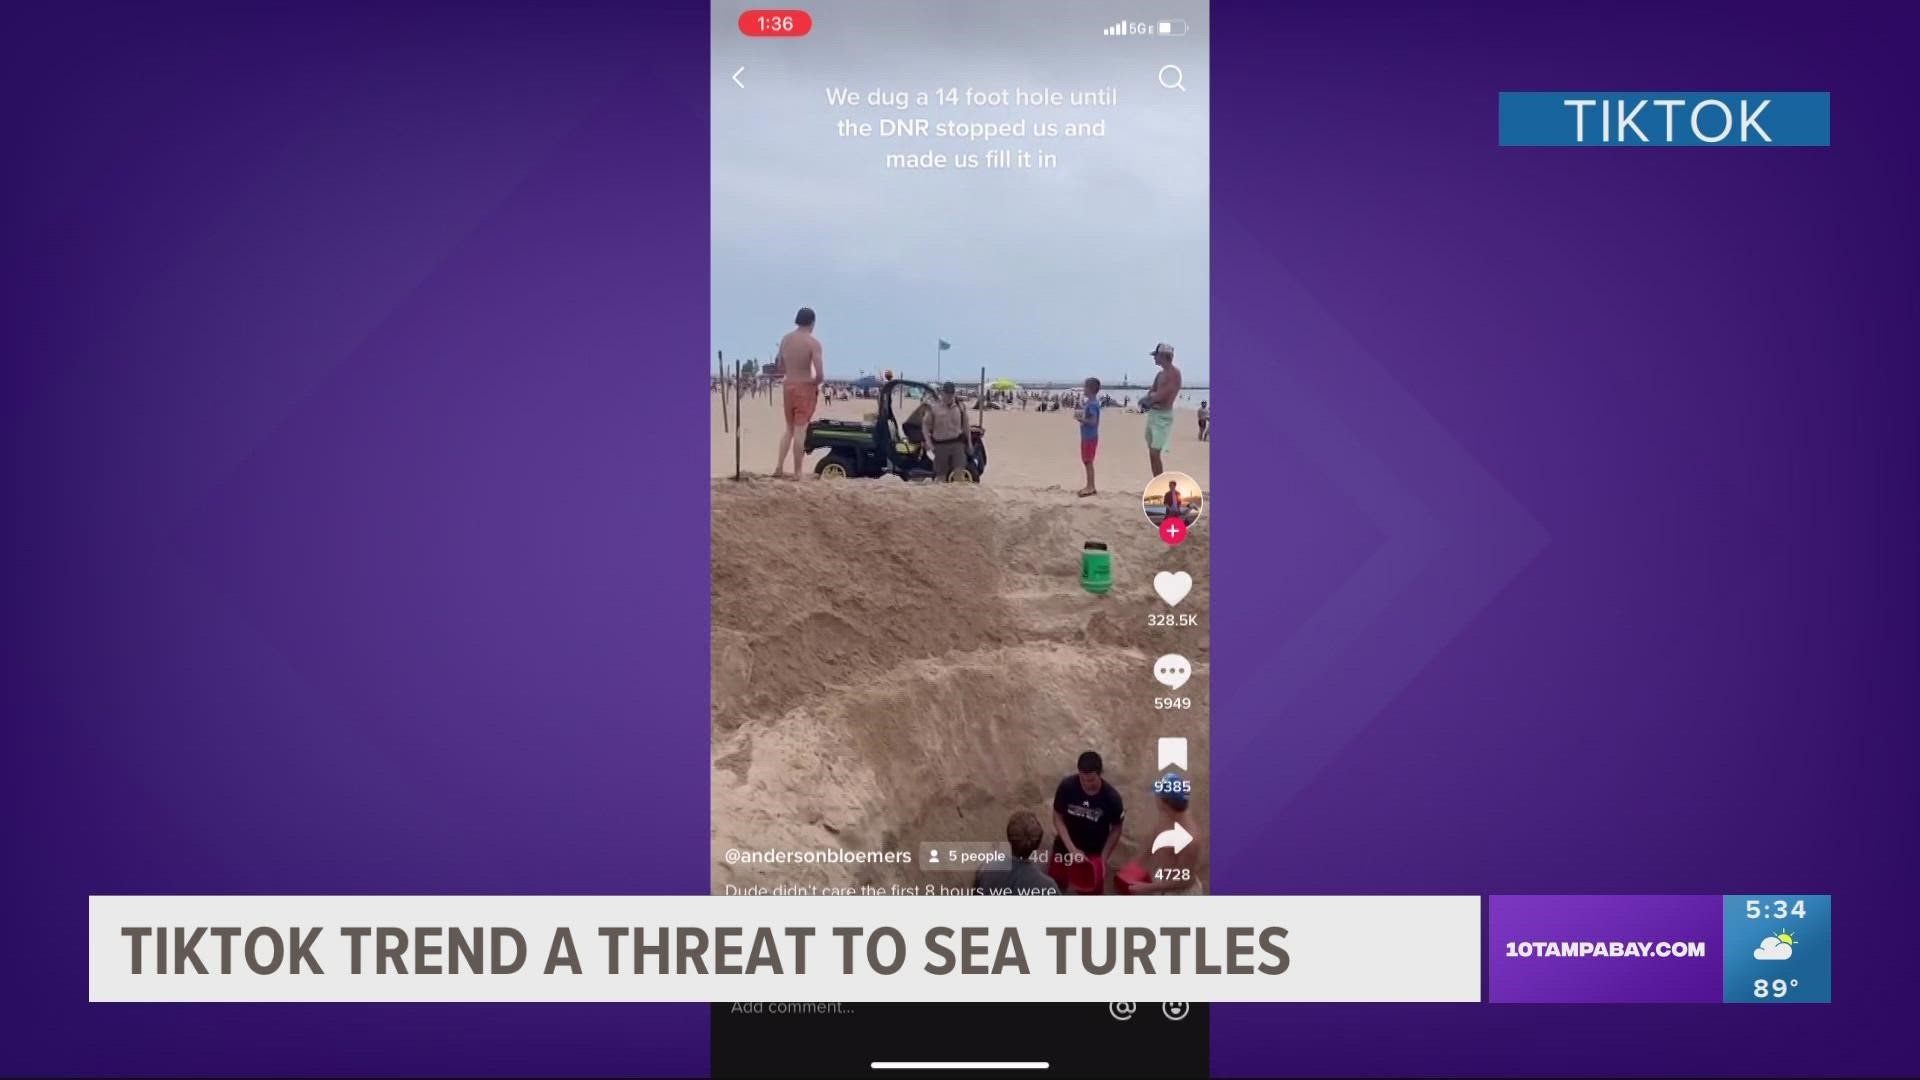 The 'beach hole digging trend' is gaining popularity. And it's happening smack dab in the middle of turtle nesting season.